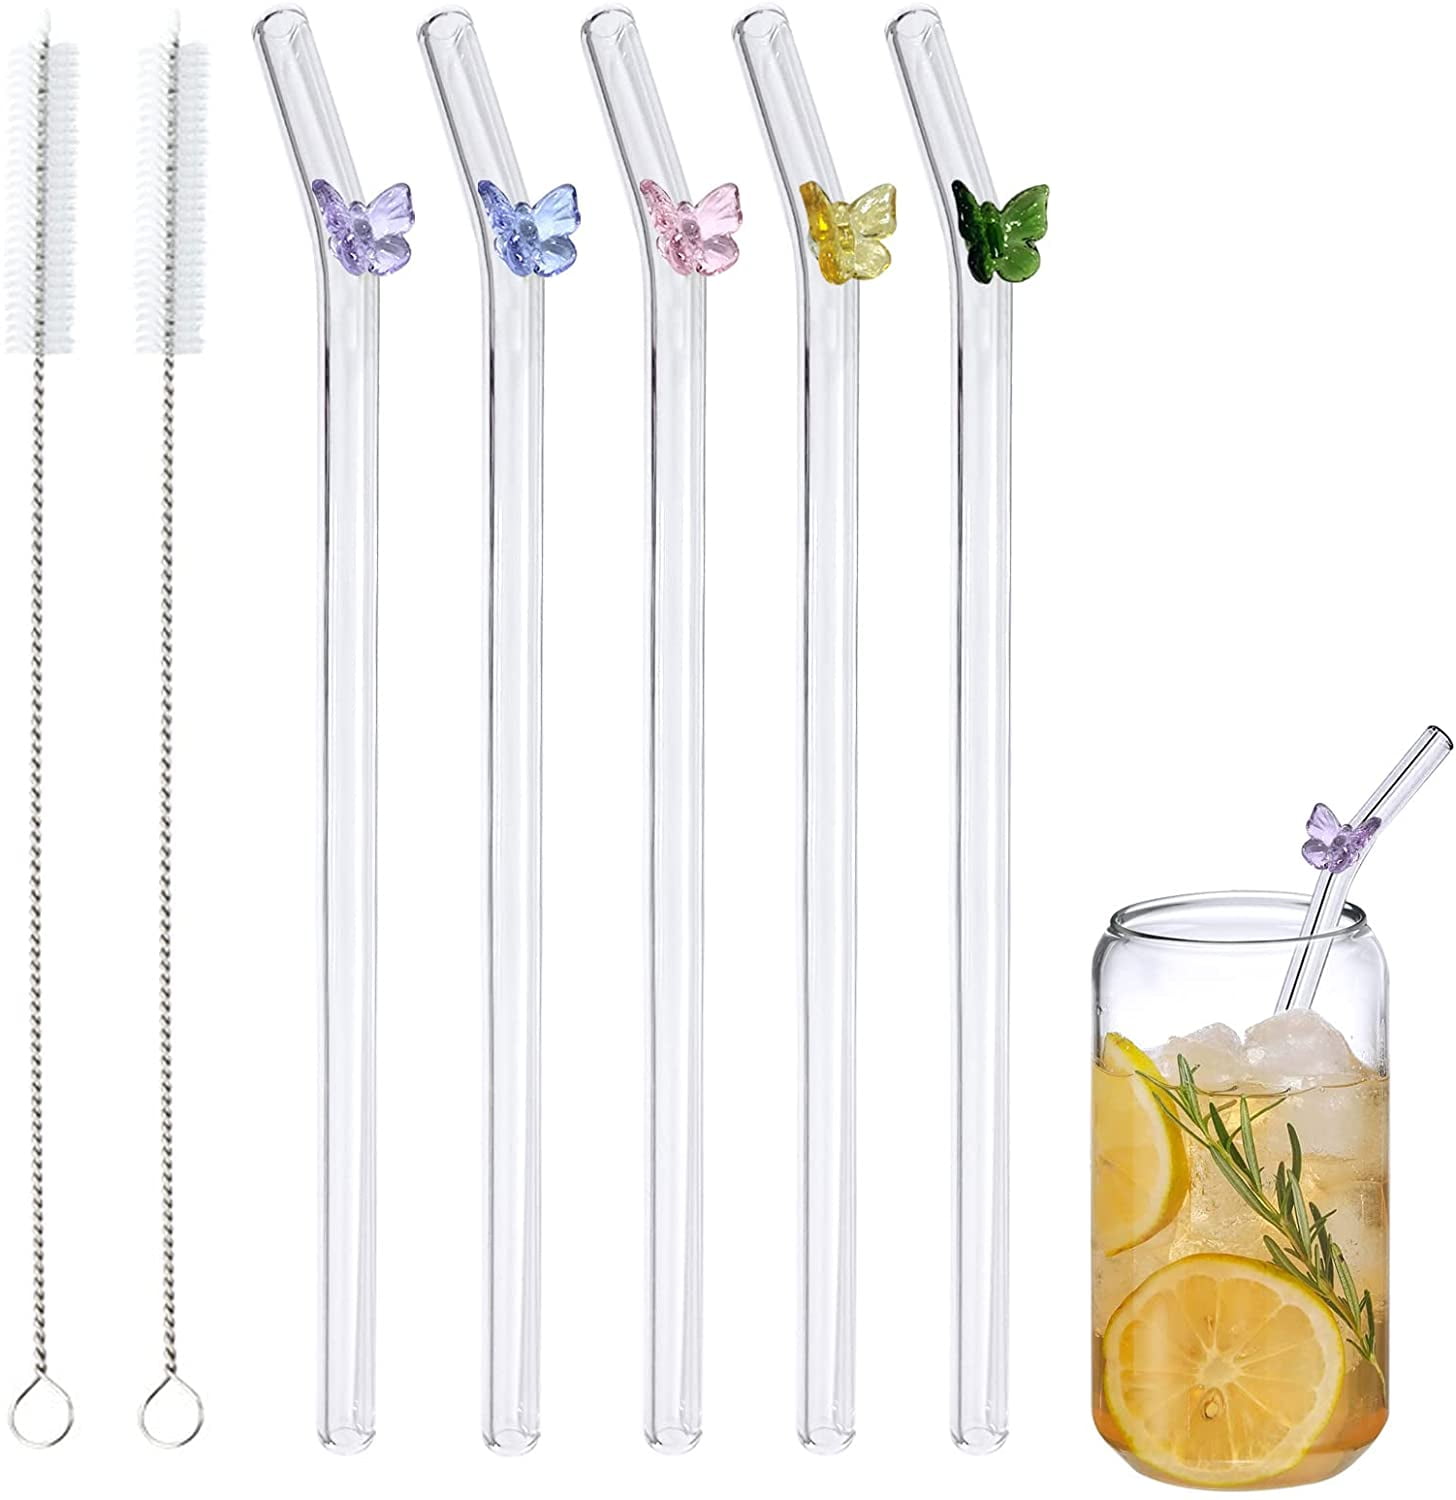 [10 Pcs] Reusable Glass Smoothie Multicolor Straws - 9 x 12 mm Eco  Friendly Boba Straws with 2 Cleaning Brushes for Bubble Tea,Milkshakes,Juice